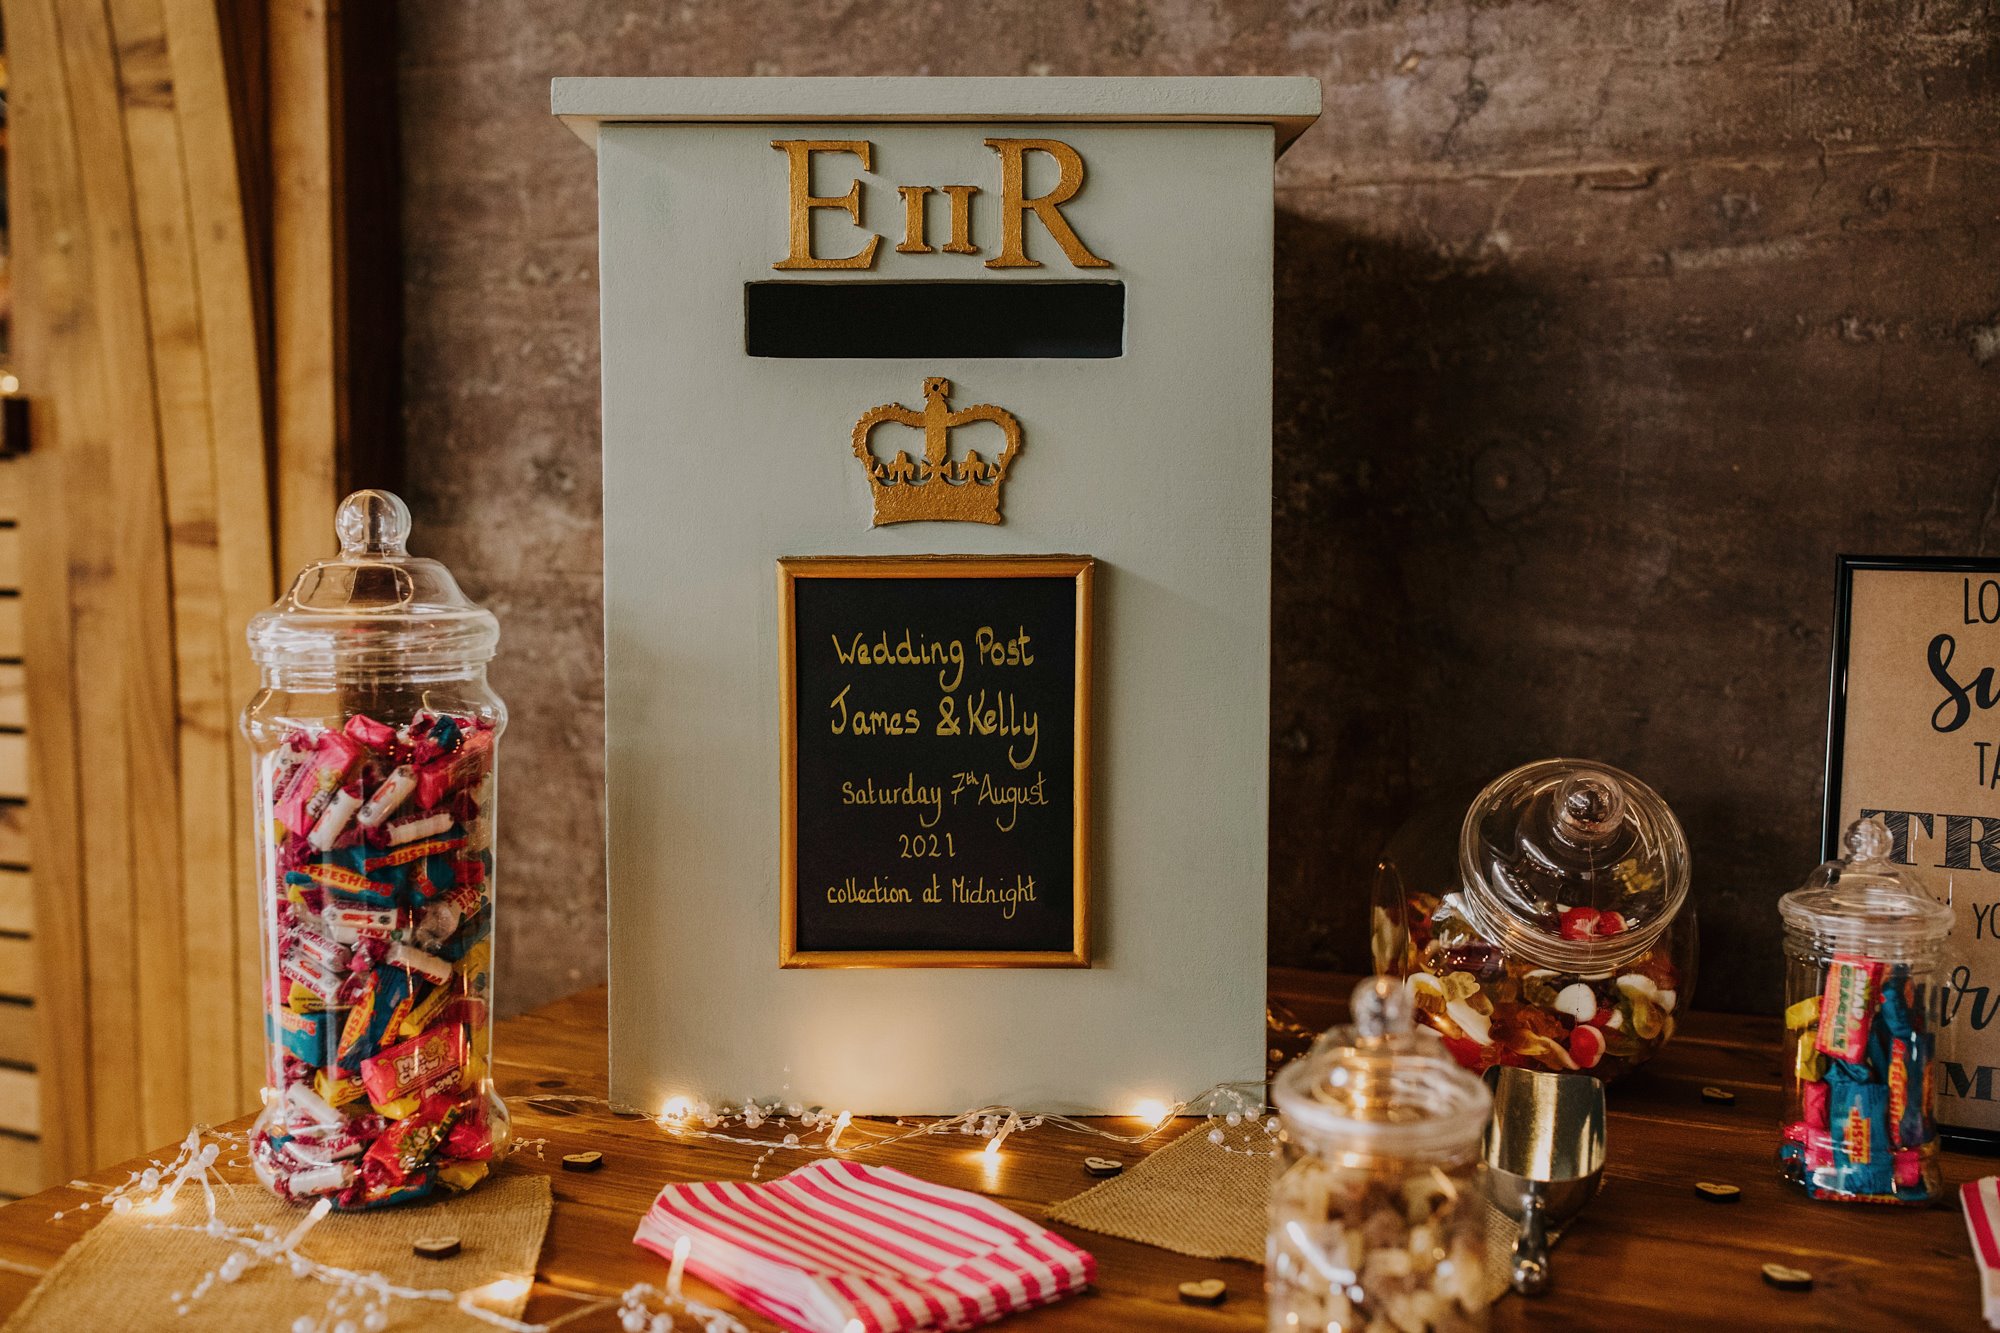 English wedding decor sweet table with a postbox with ER the Queens initials for jubilee inspired wedding